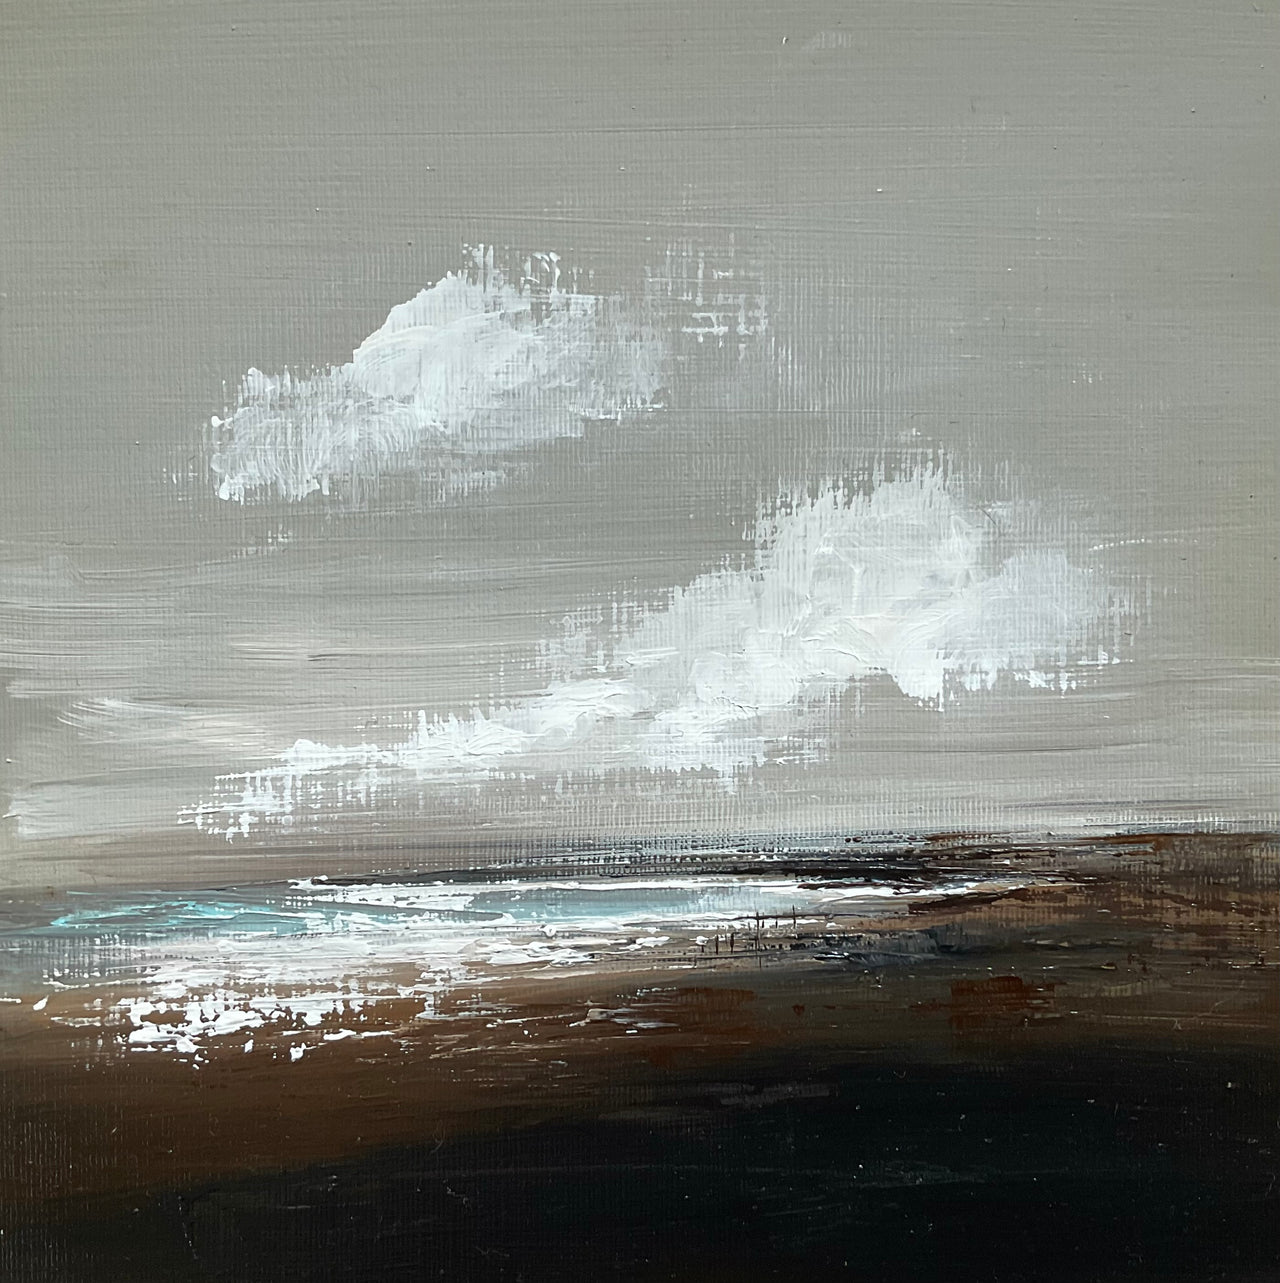 Cornish artist Nicola Mosley seascape of brown and black tones with ocean and white clouds.